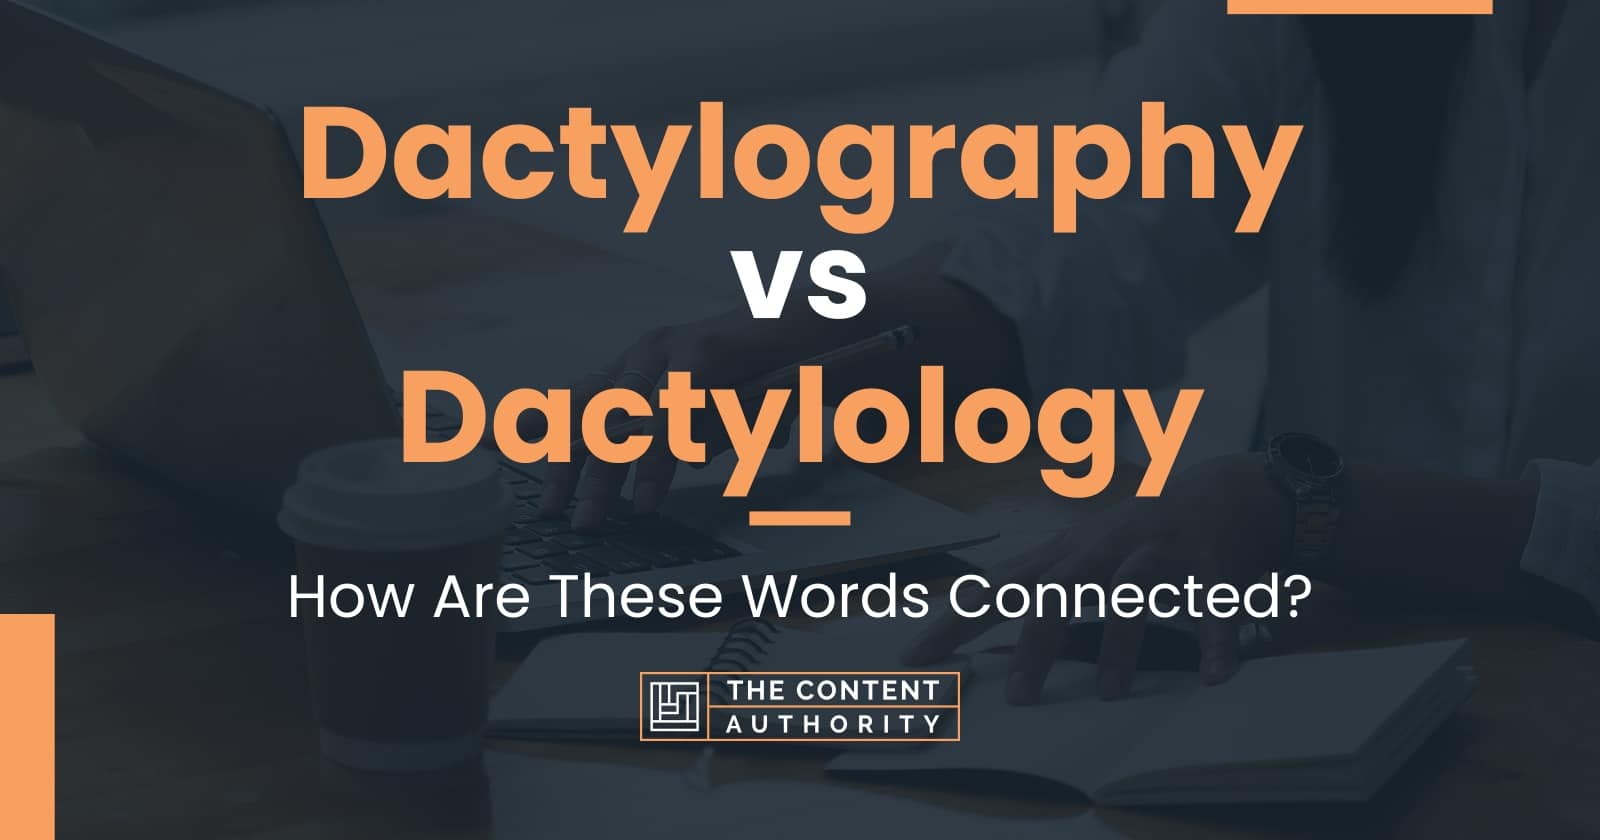 Dactylography vs Dactylology: How Are These Words Connected?